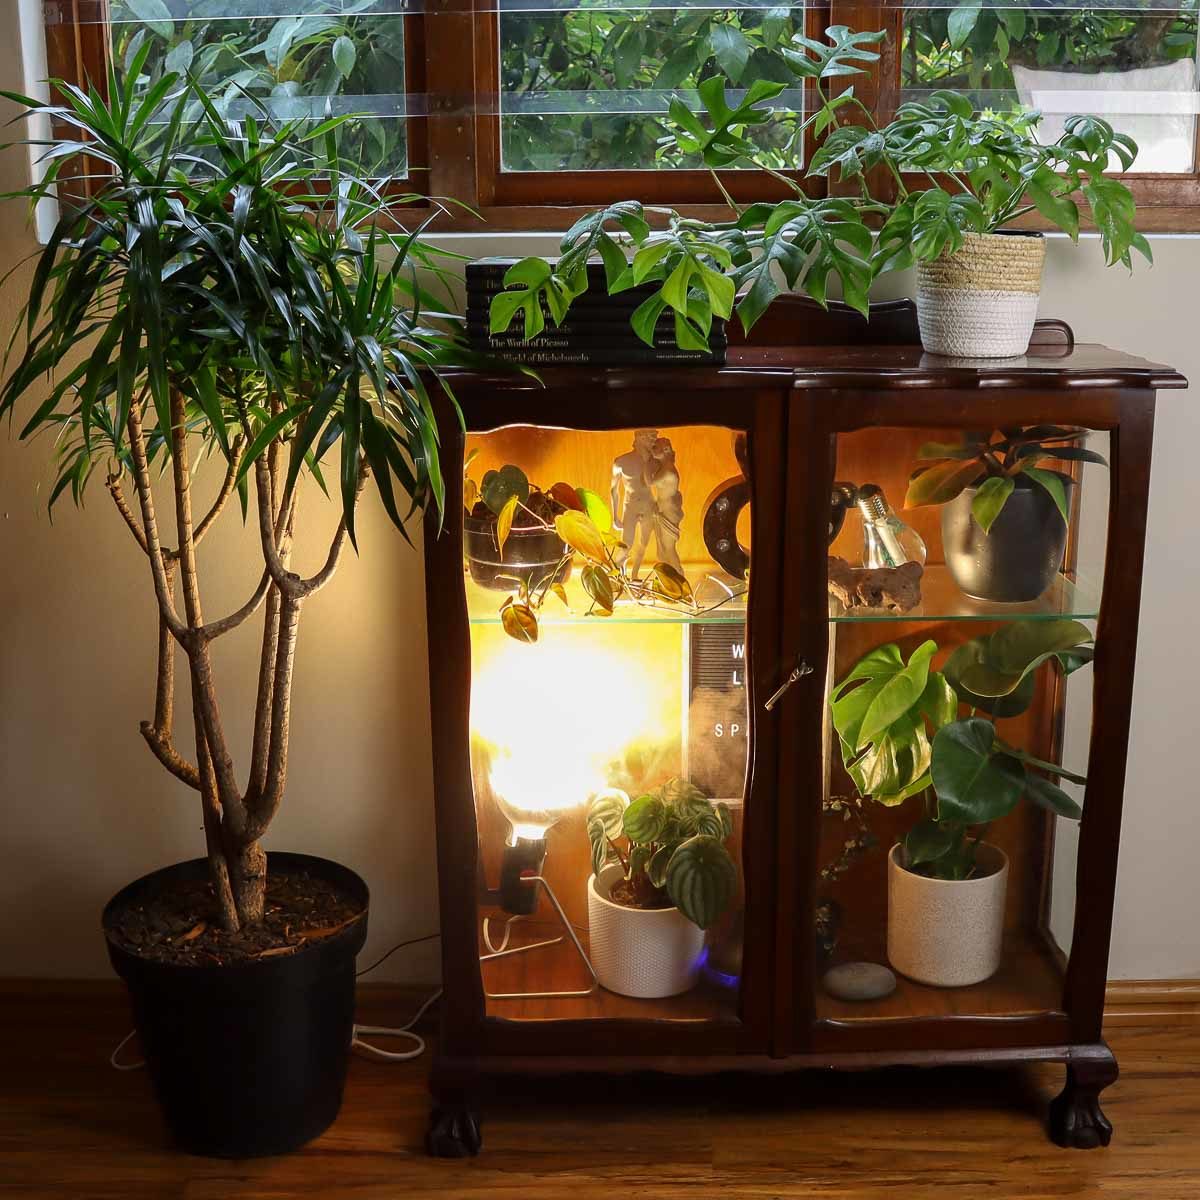 Indoor greenhouse made out of an old cabinet. 